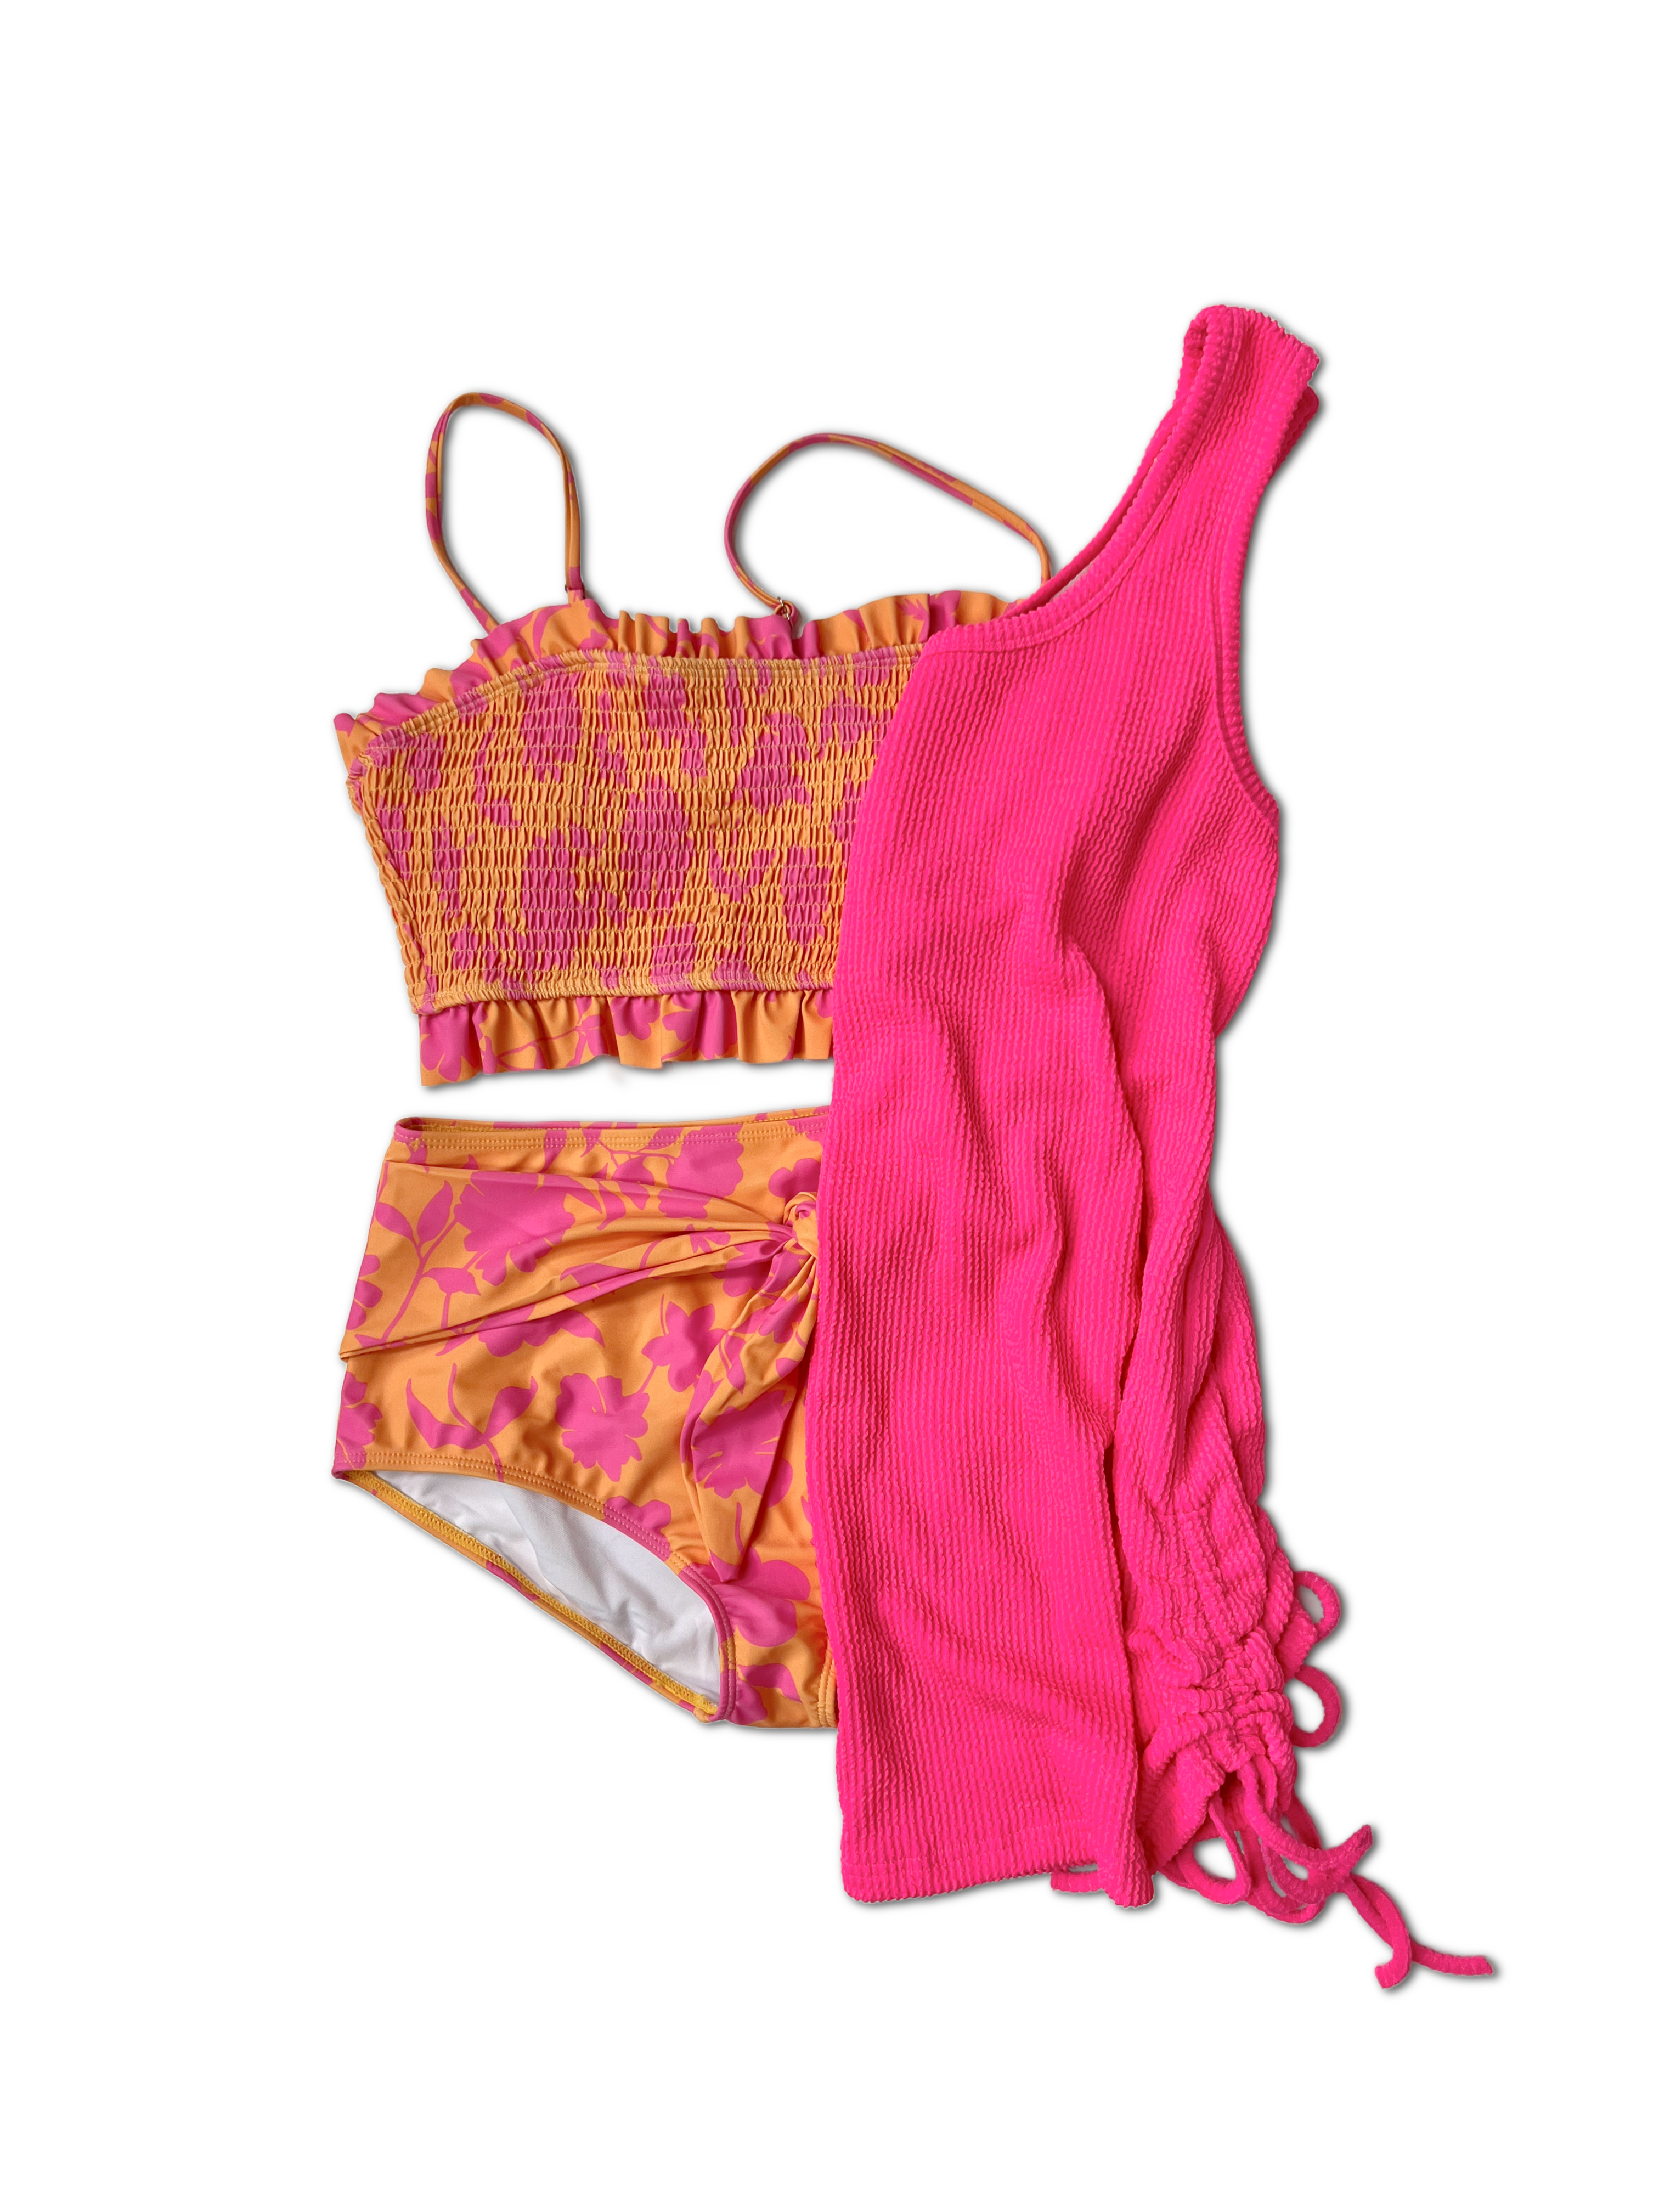 Take it Slow - Hot Pink Coverup